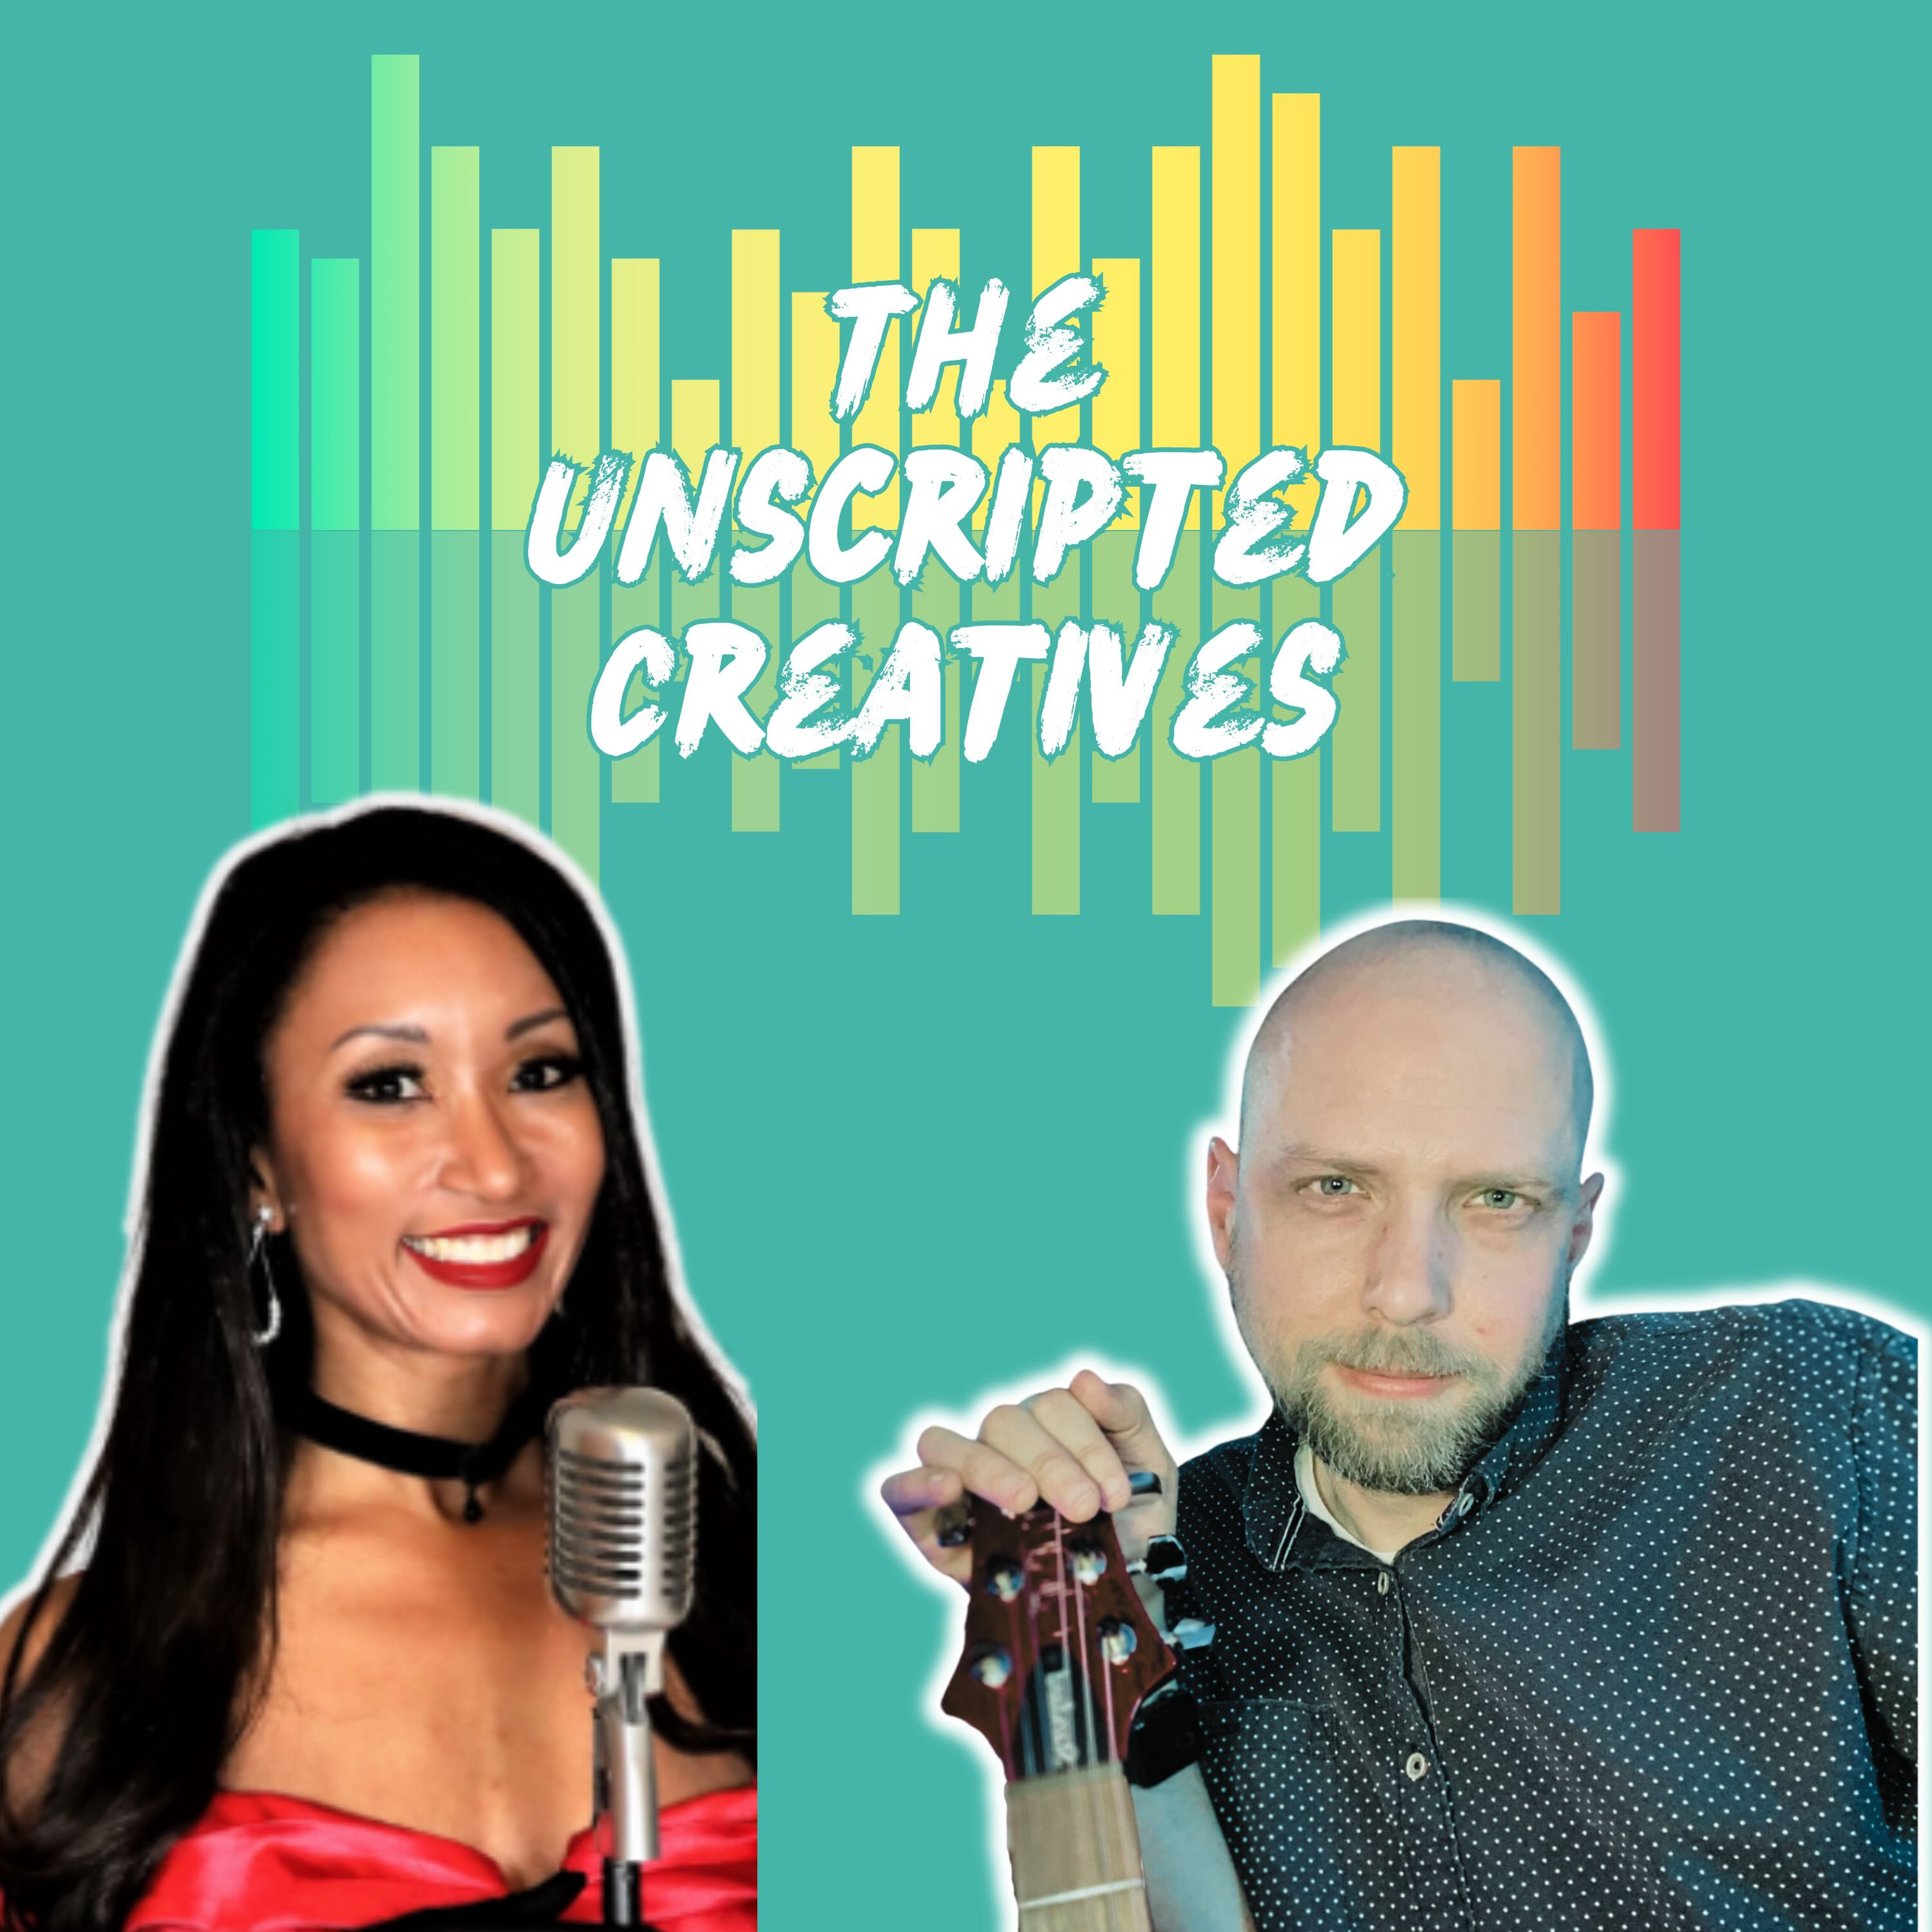 The Unscripted Creatives